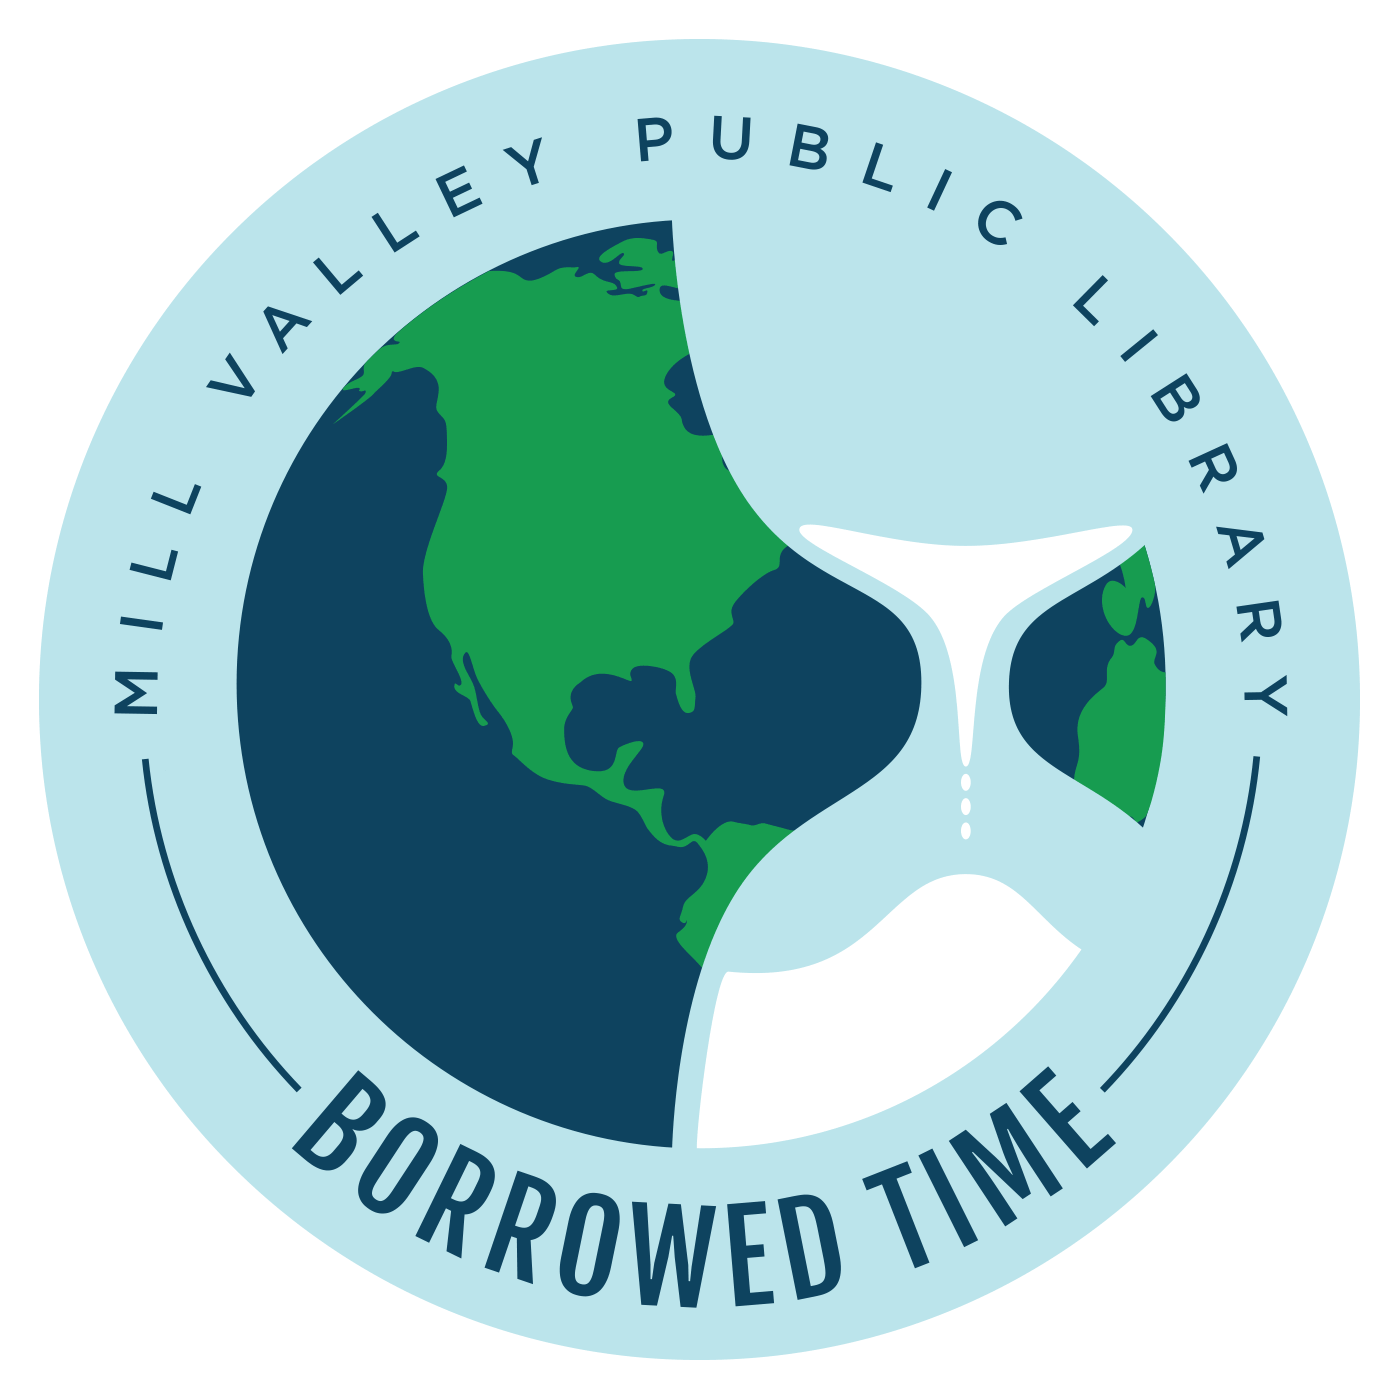 animated Borrowed Time logo: a globe with an hour glass on top of it animated to have the hour glass time run out as the land slowly disappears into the ocean